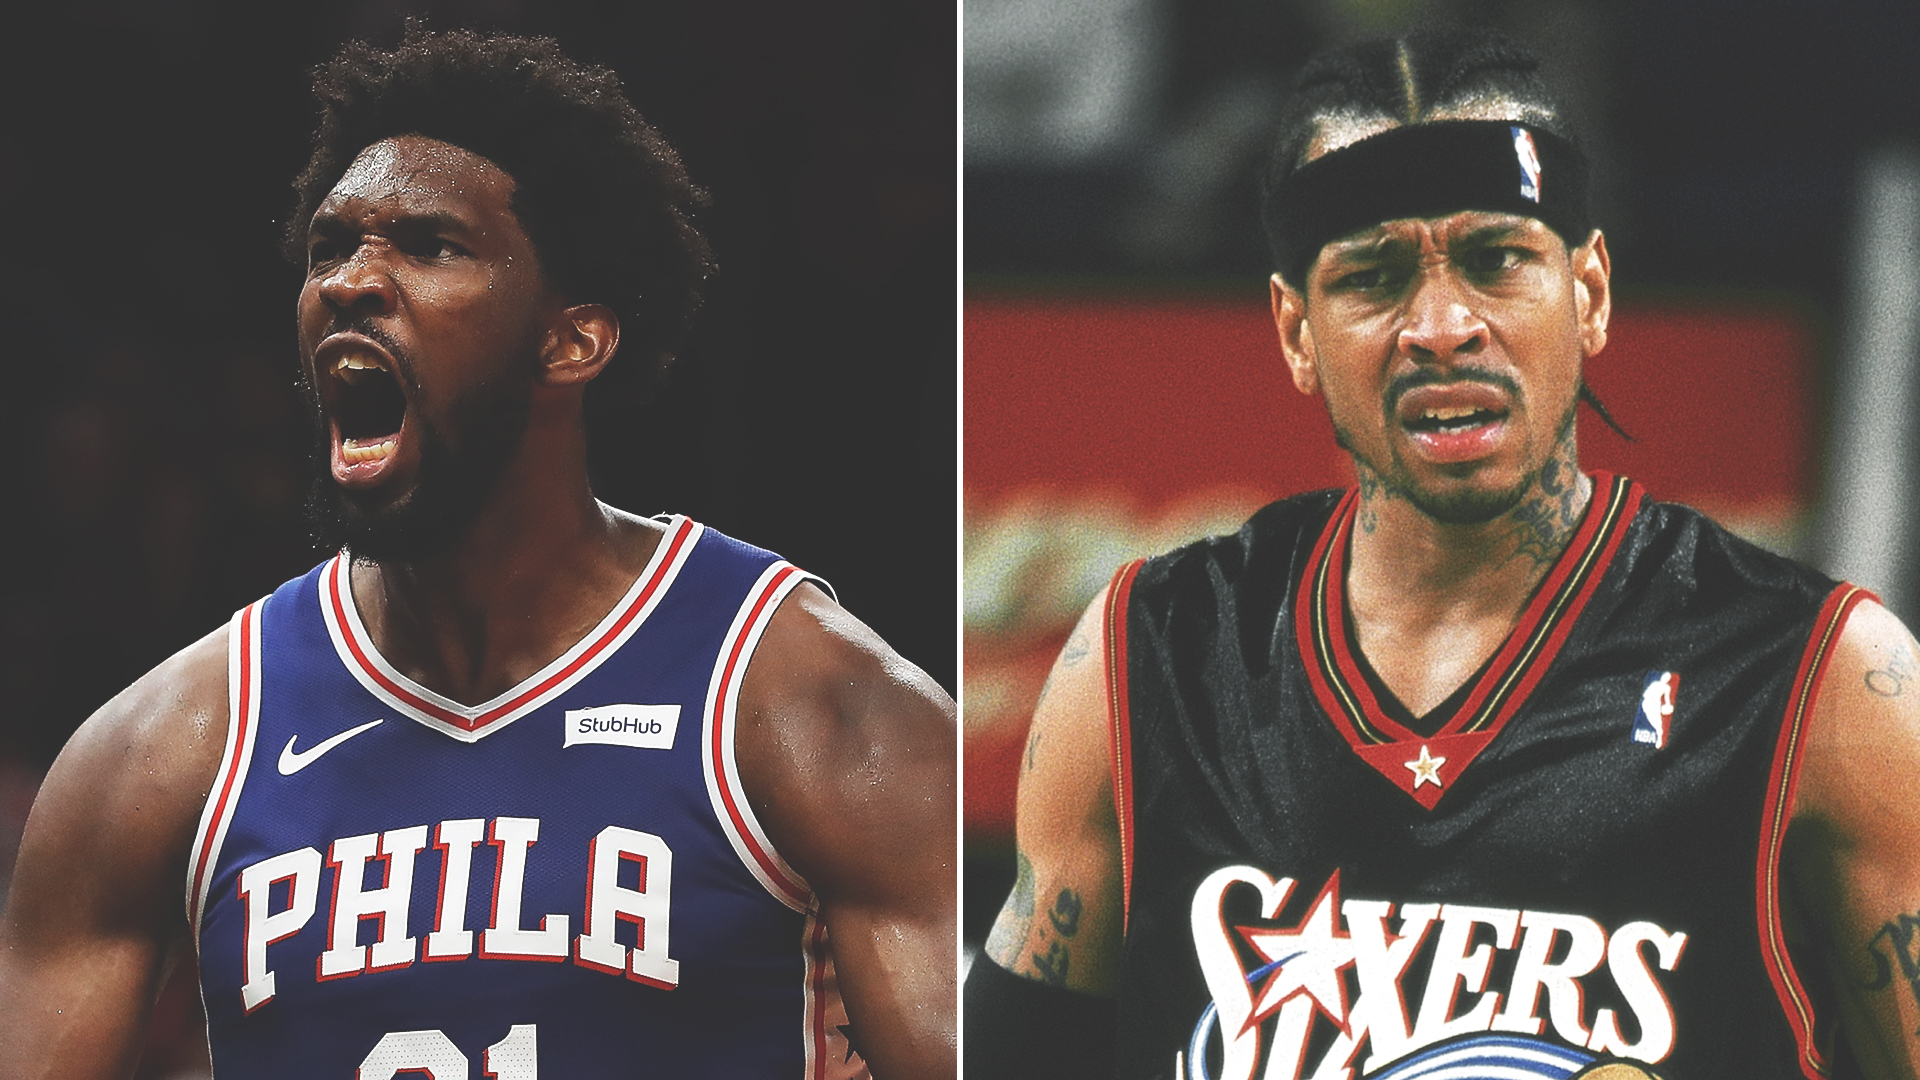 Sixers treasures: A comparison of Allen Iverson and Joel Embiid